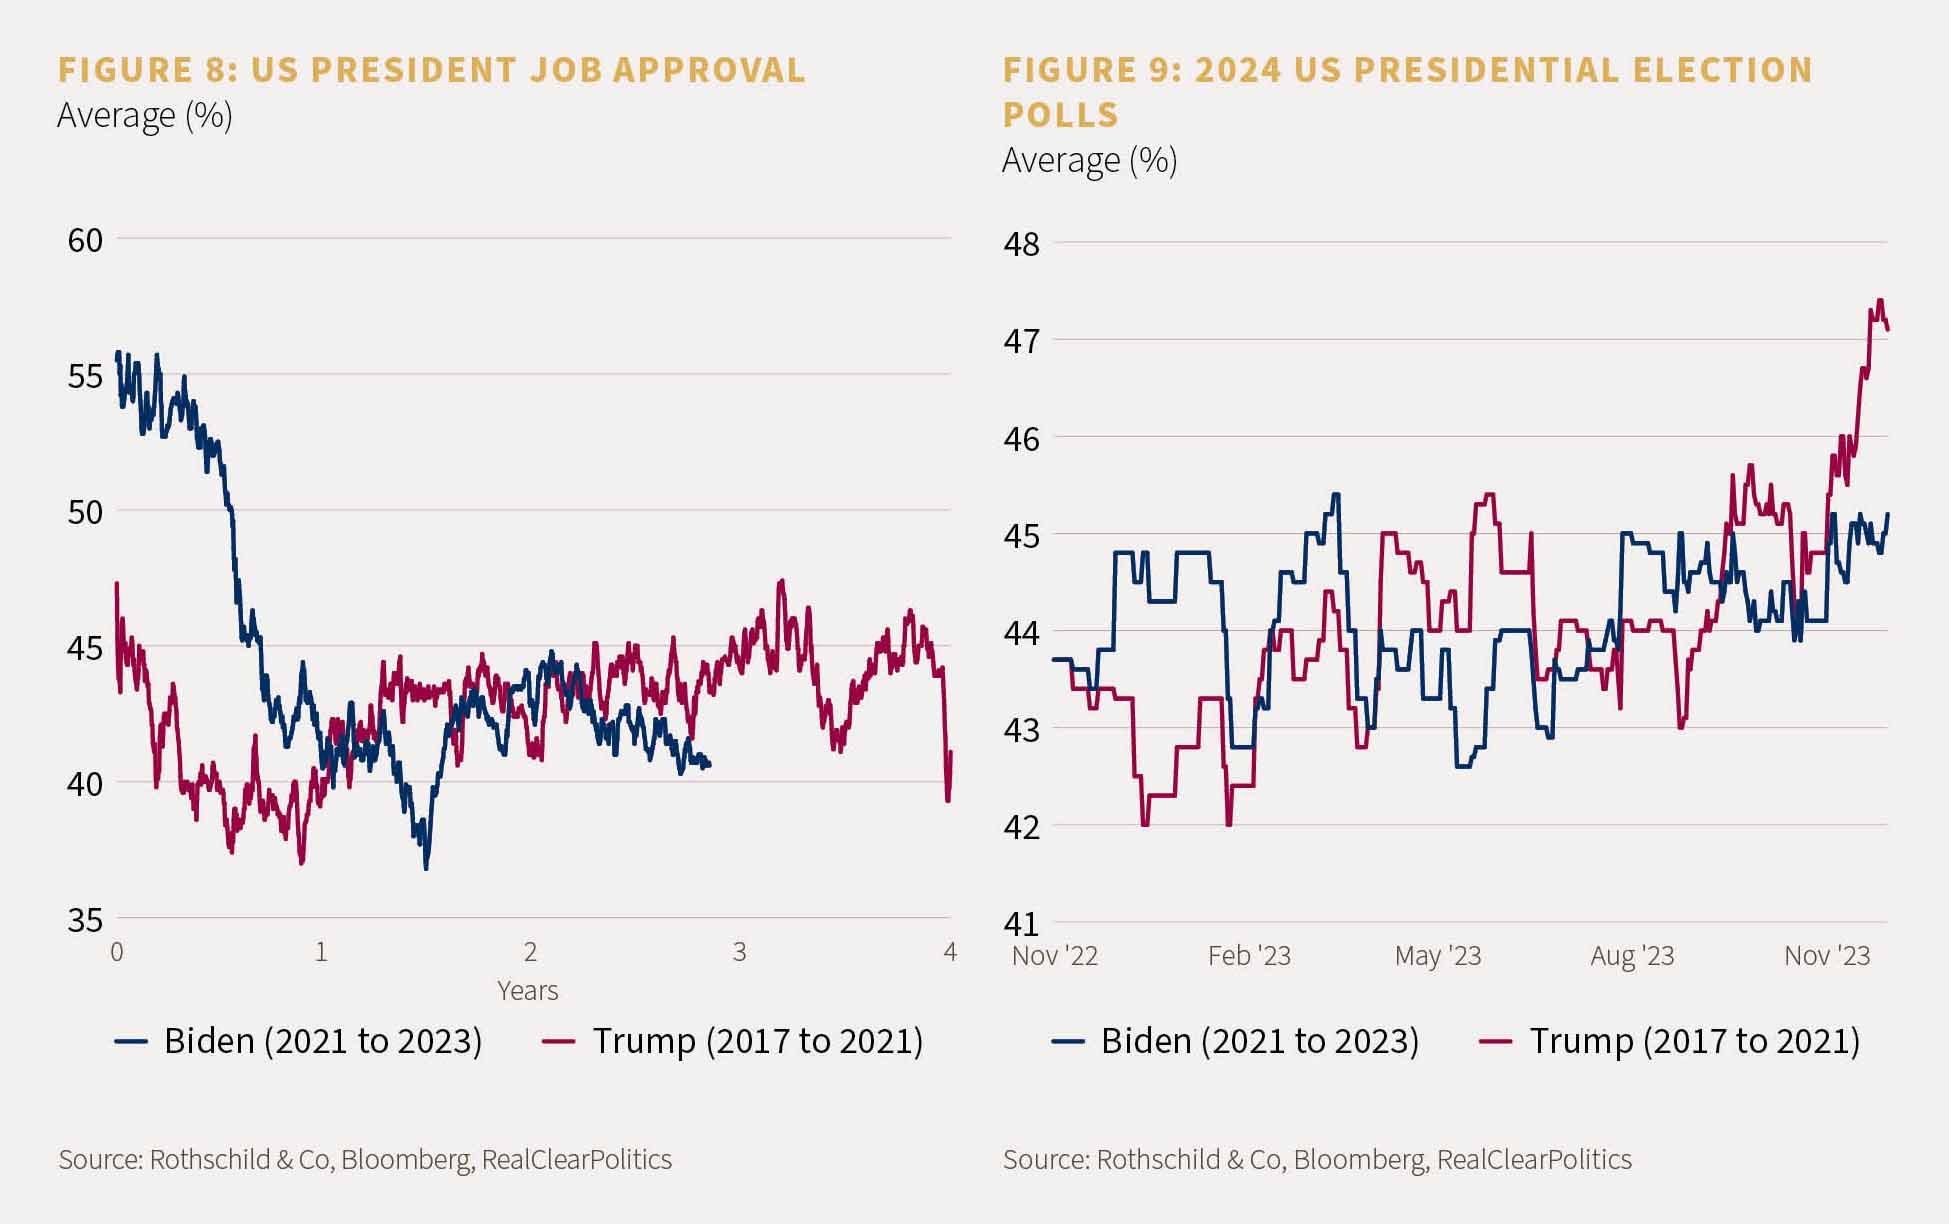 Figure 8 shows a comparison between Joe Biden and Donald Trump's US President job approval. Figure 9 shows a comparison between Joe Biden and Donald Trump in the US Presidential election polls. 